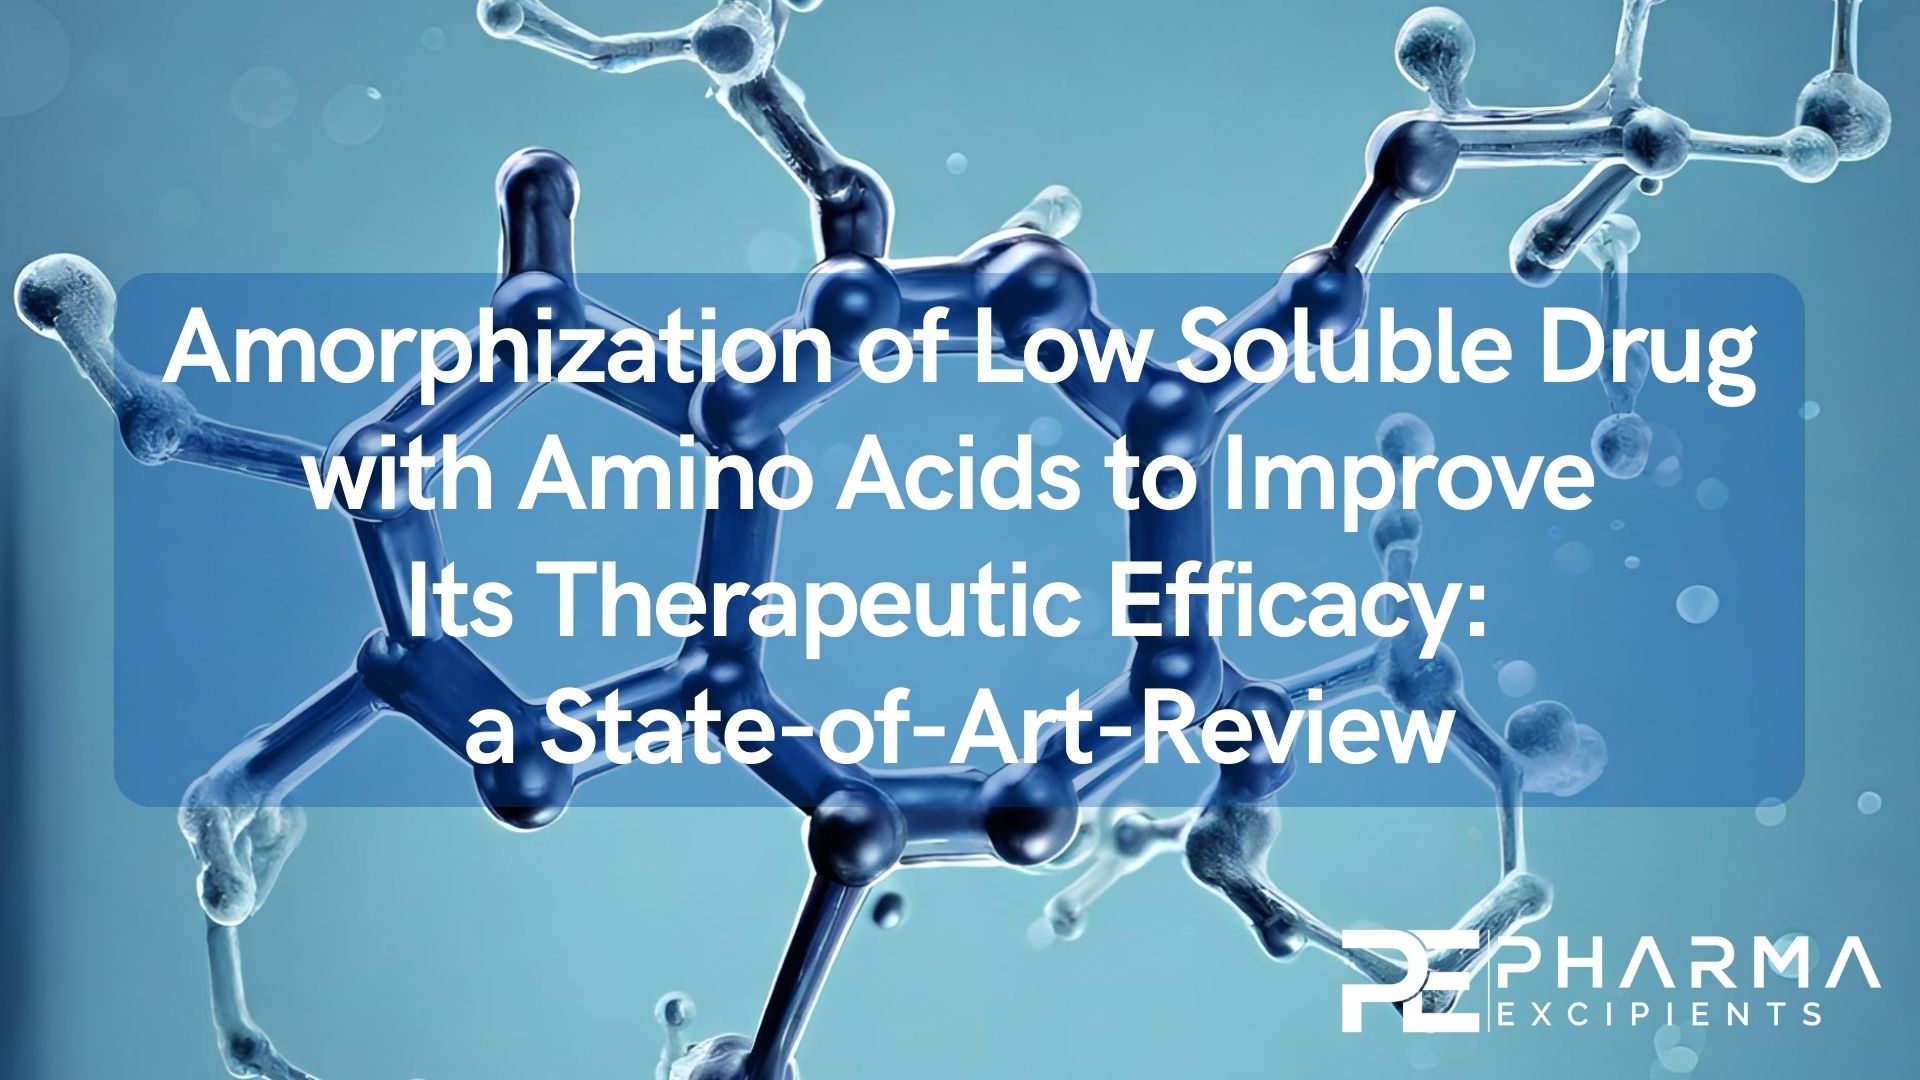 Amorphization-of-Low-Soluble-Drug-with-Amino-Acids